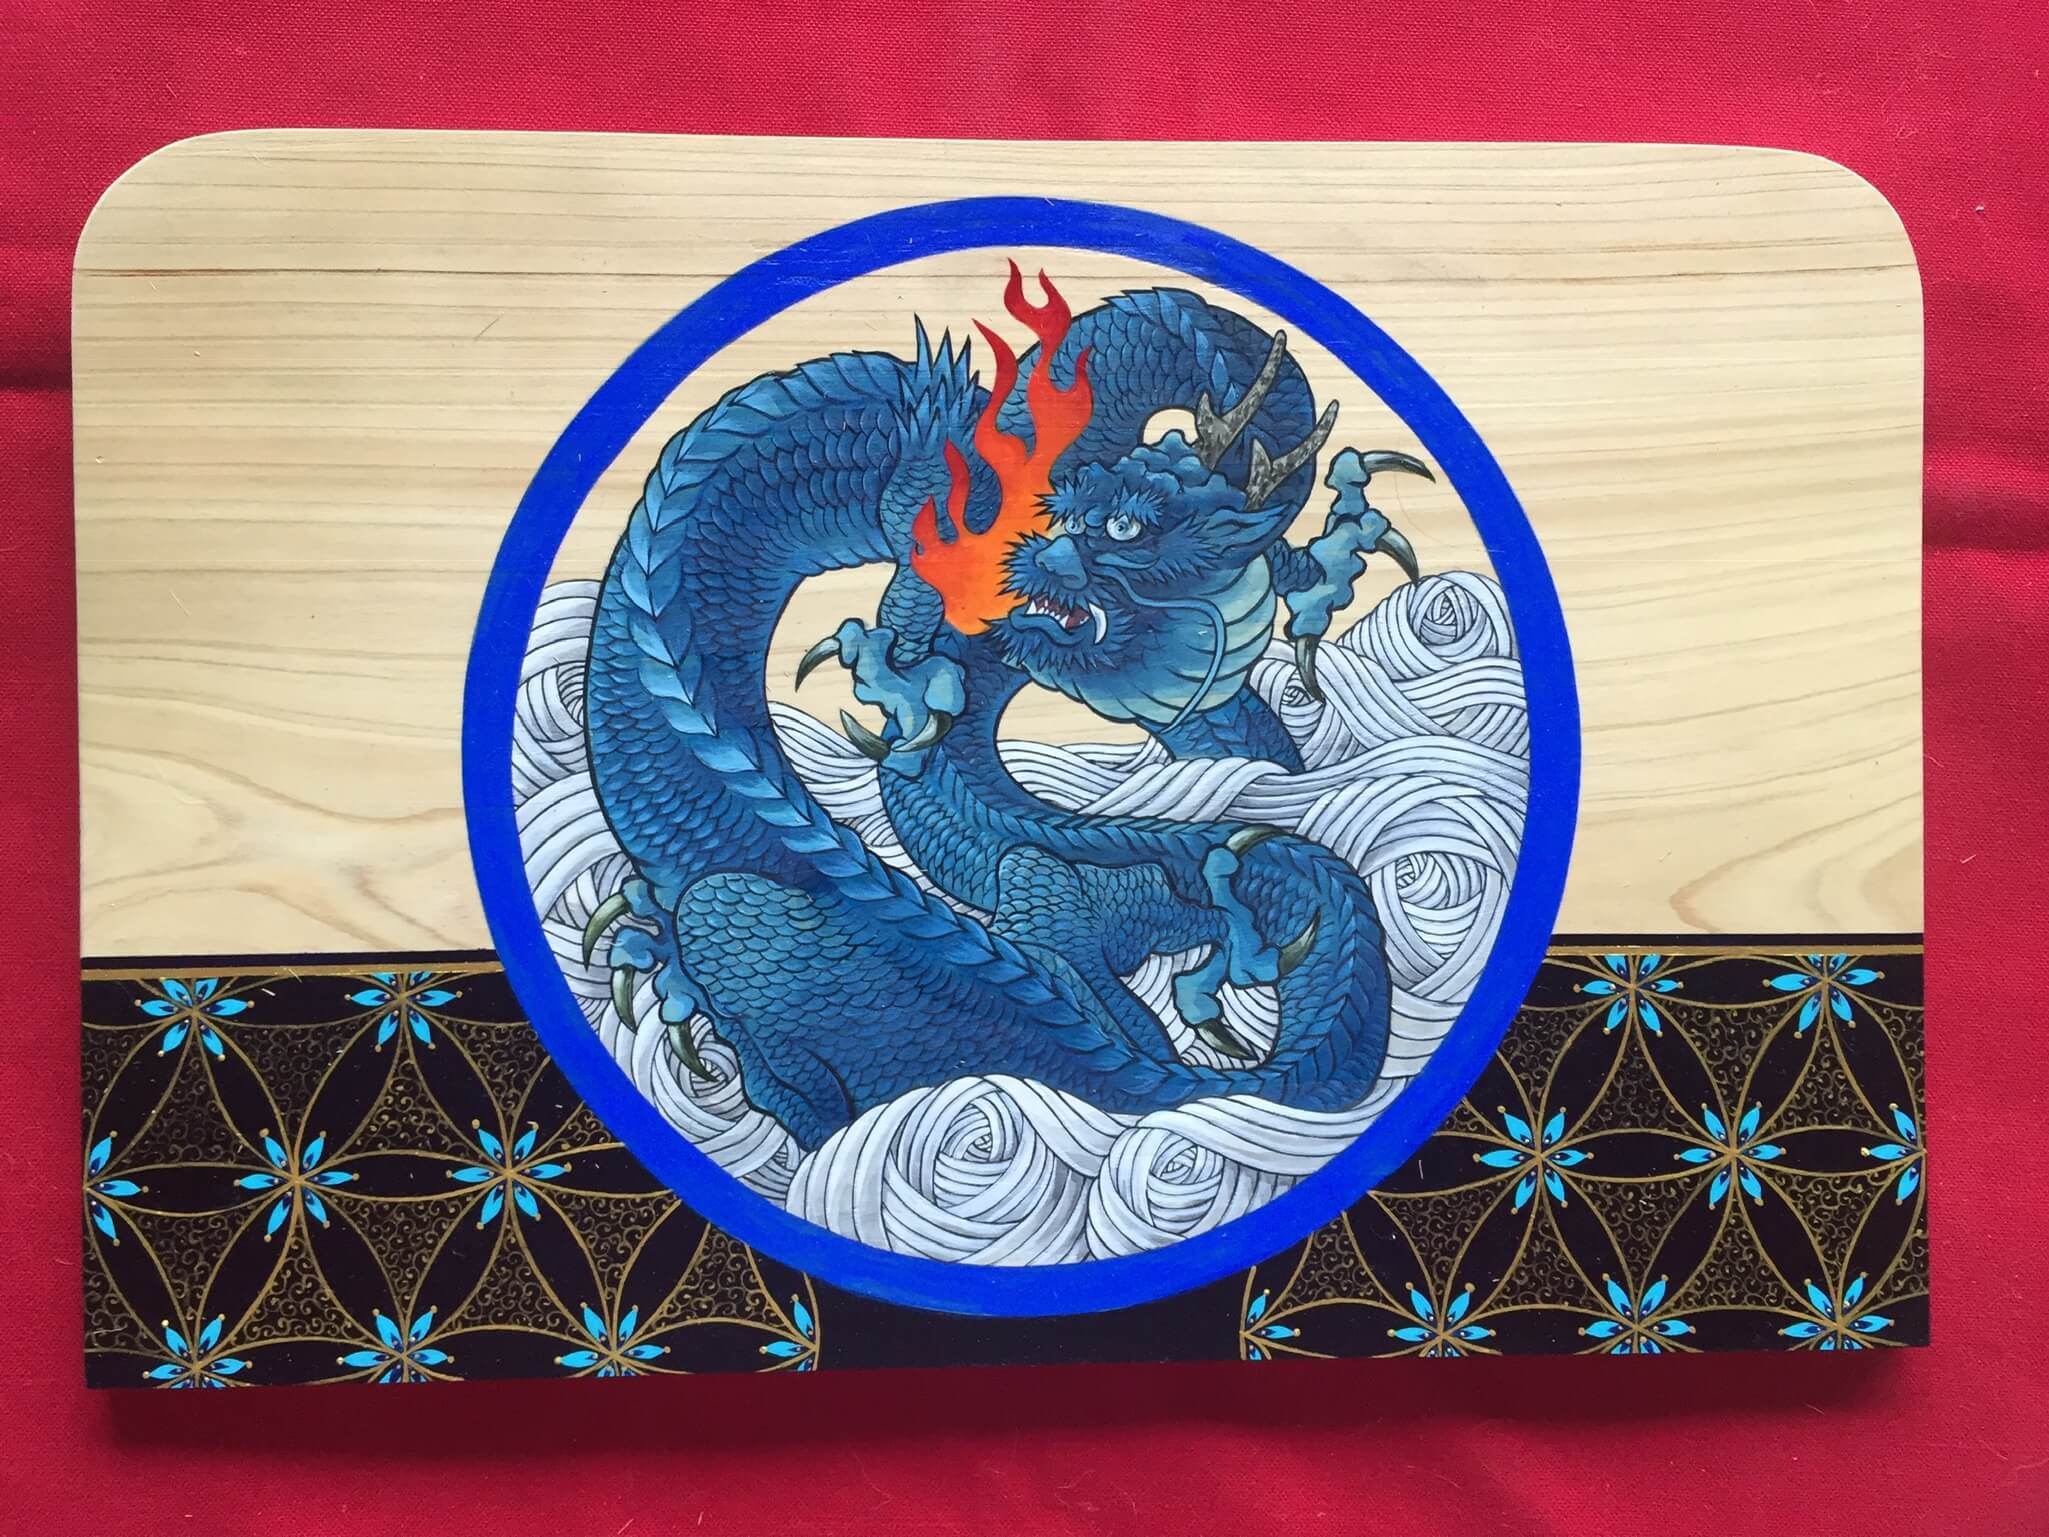 Seiryuen-zu (Blue Dragon among clouds in circle)- Painting